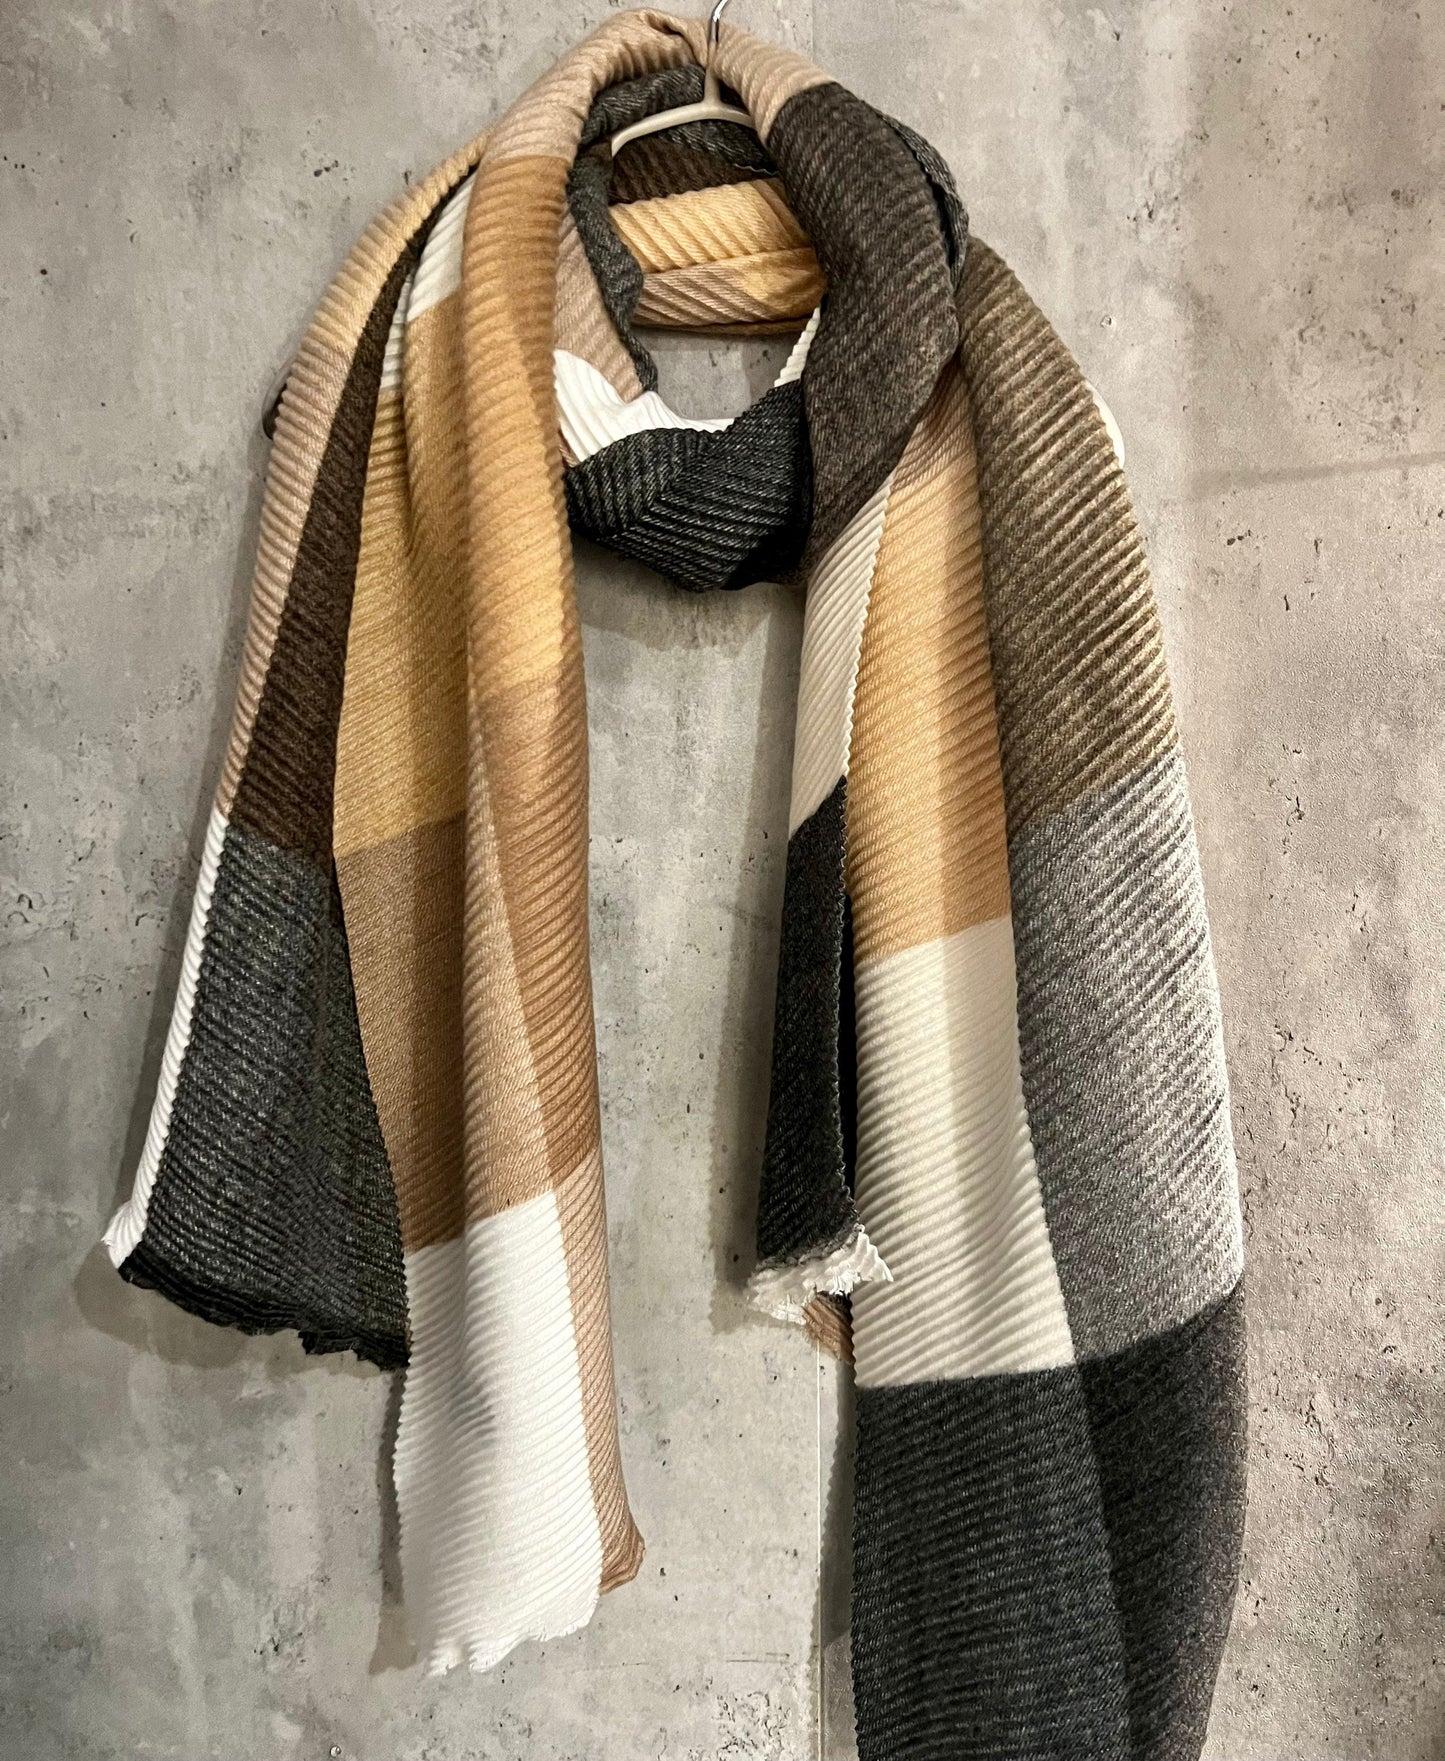 Block Pattern Beige Grey Black Cashmere Blend Scarf/Autumn Winter Scarf/Gifts For Mum/Gifts For Her Birthday Christmas/UK Seller/Scarf Women